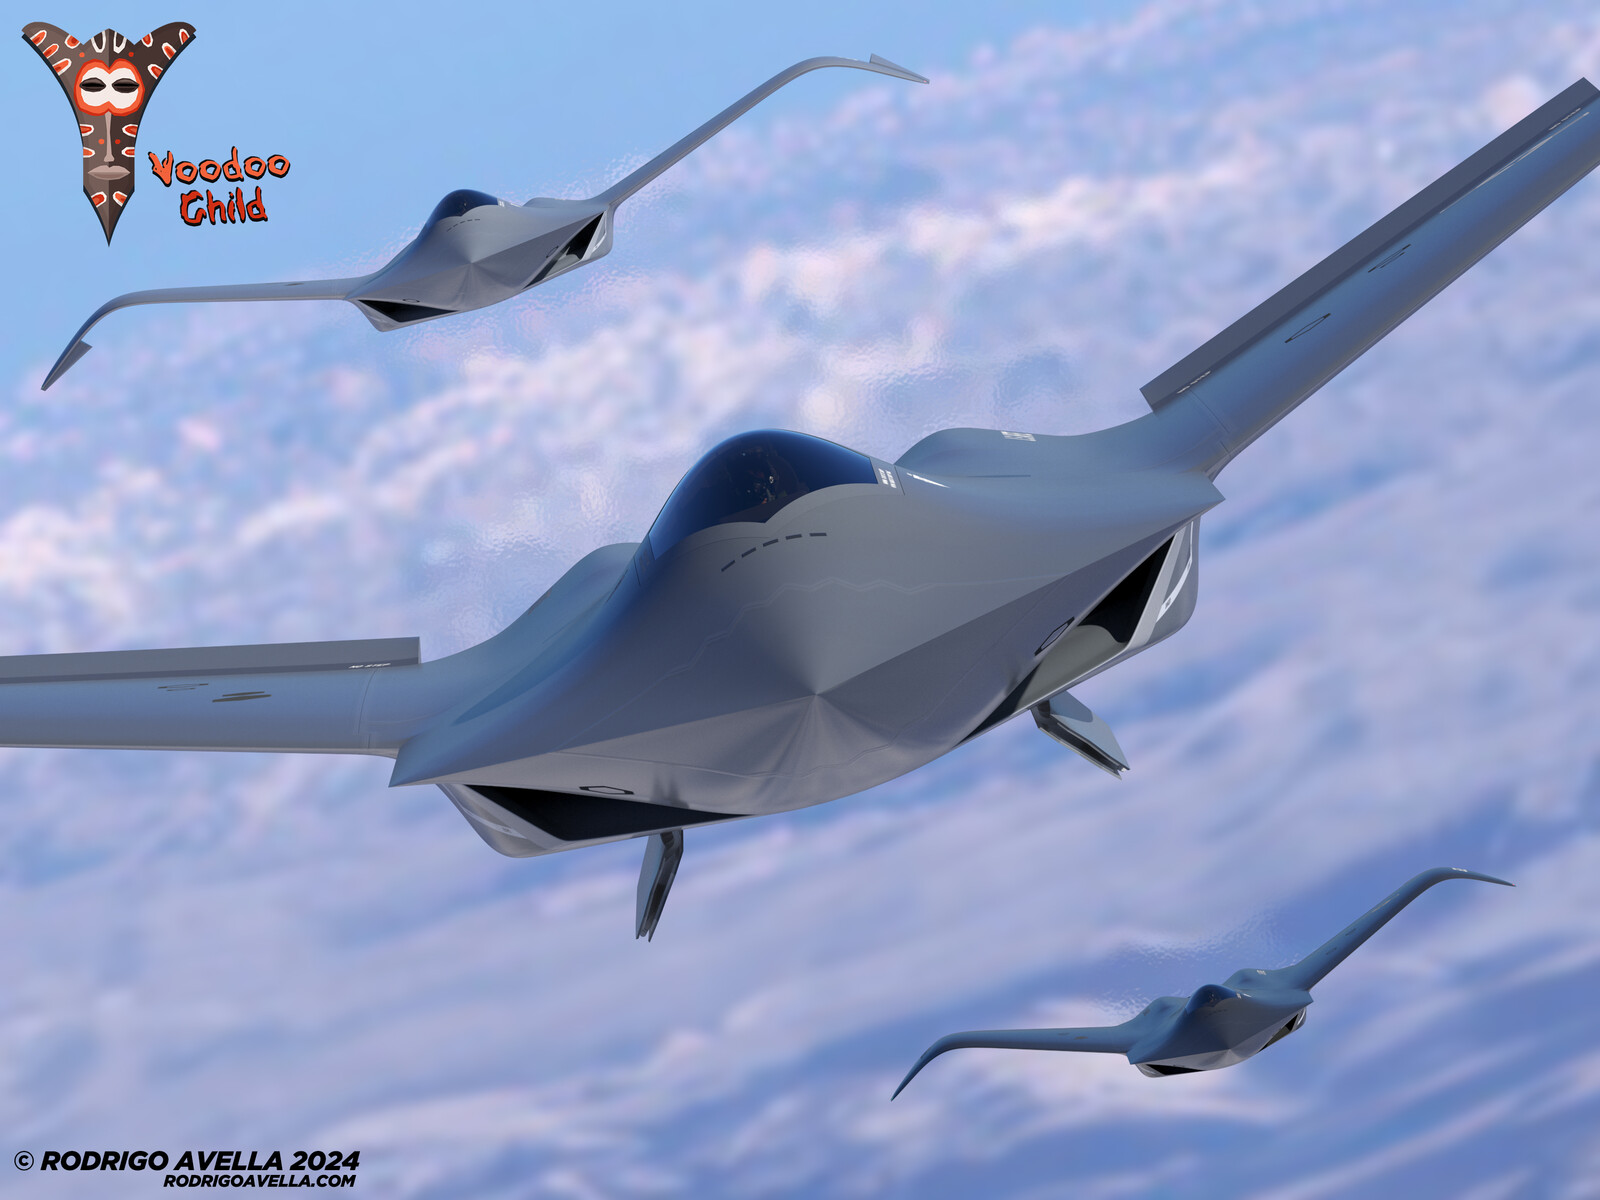 Voodoo Child - Sixth generation fighter concept